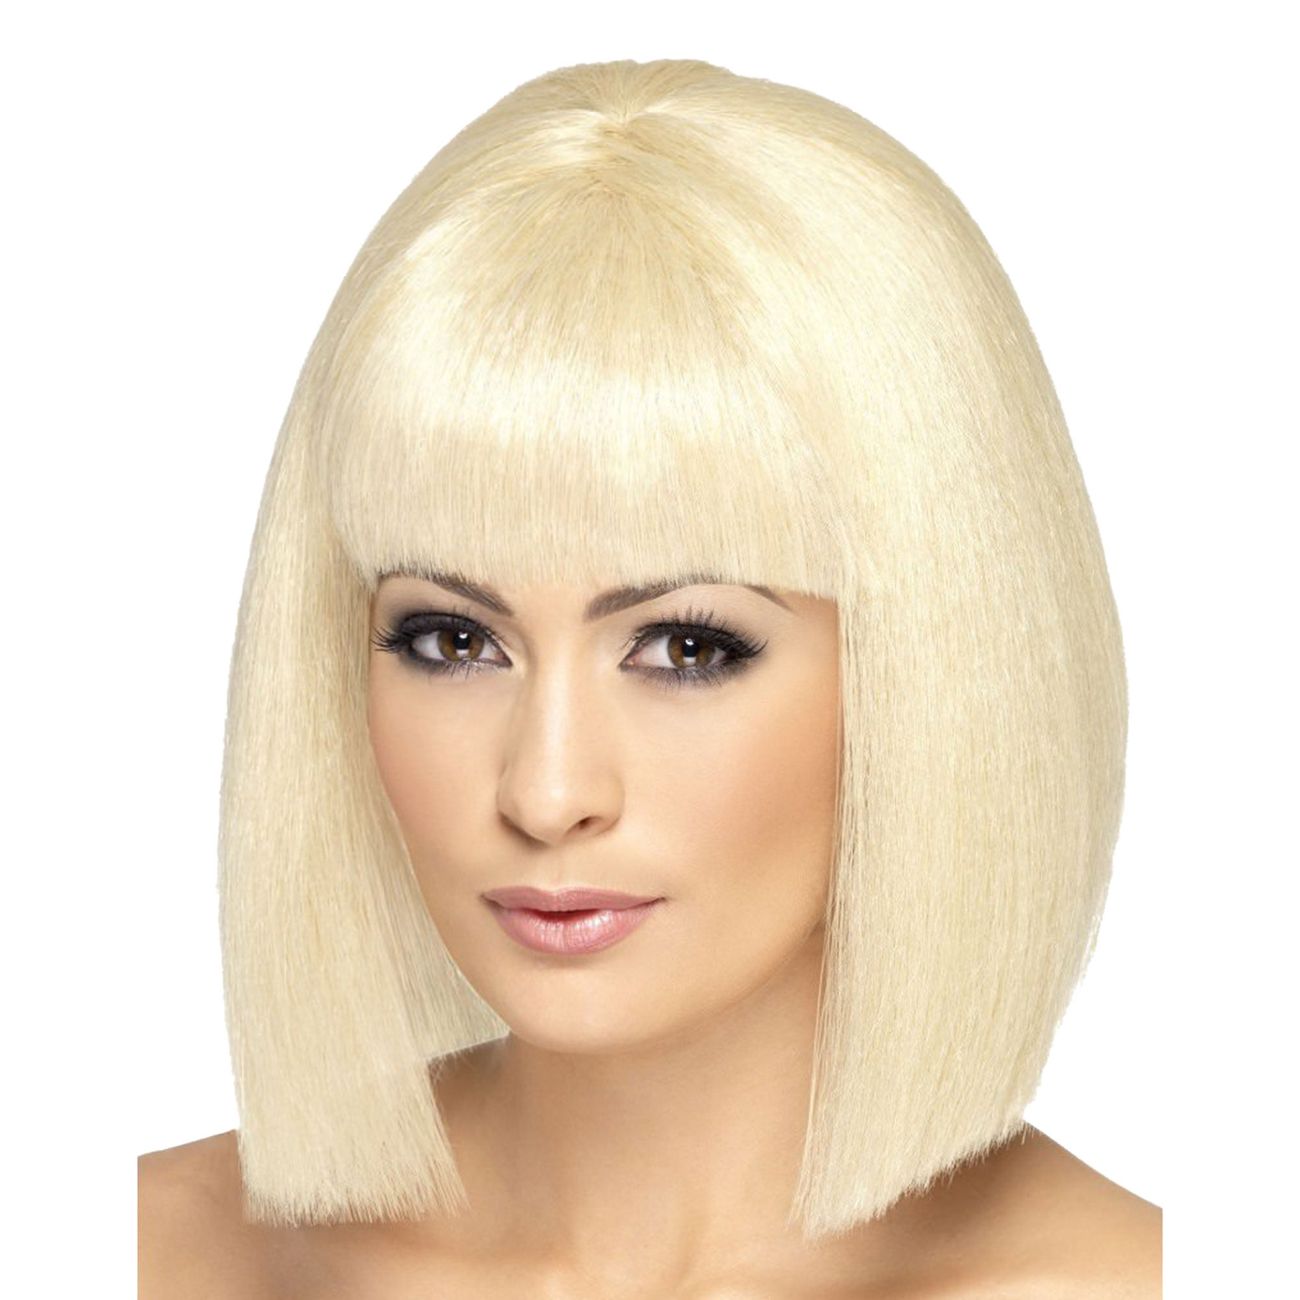 blond-page-peruk-med-hellugg-84793-2